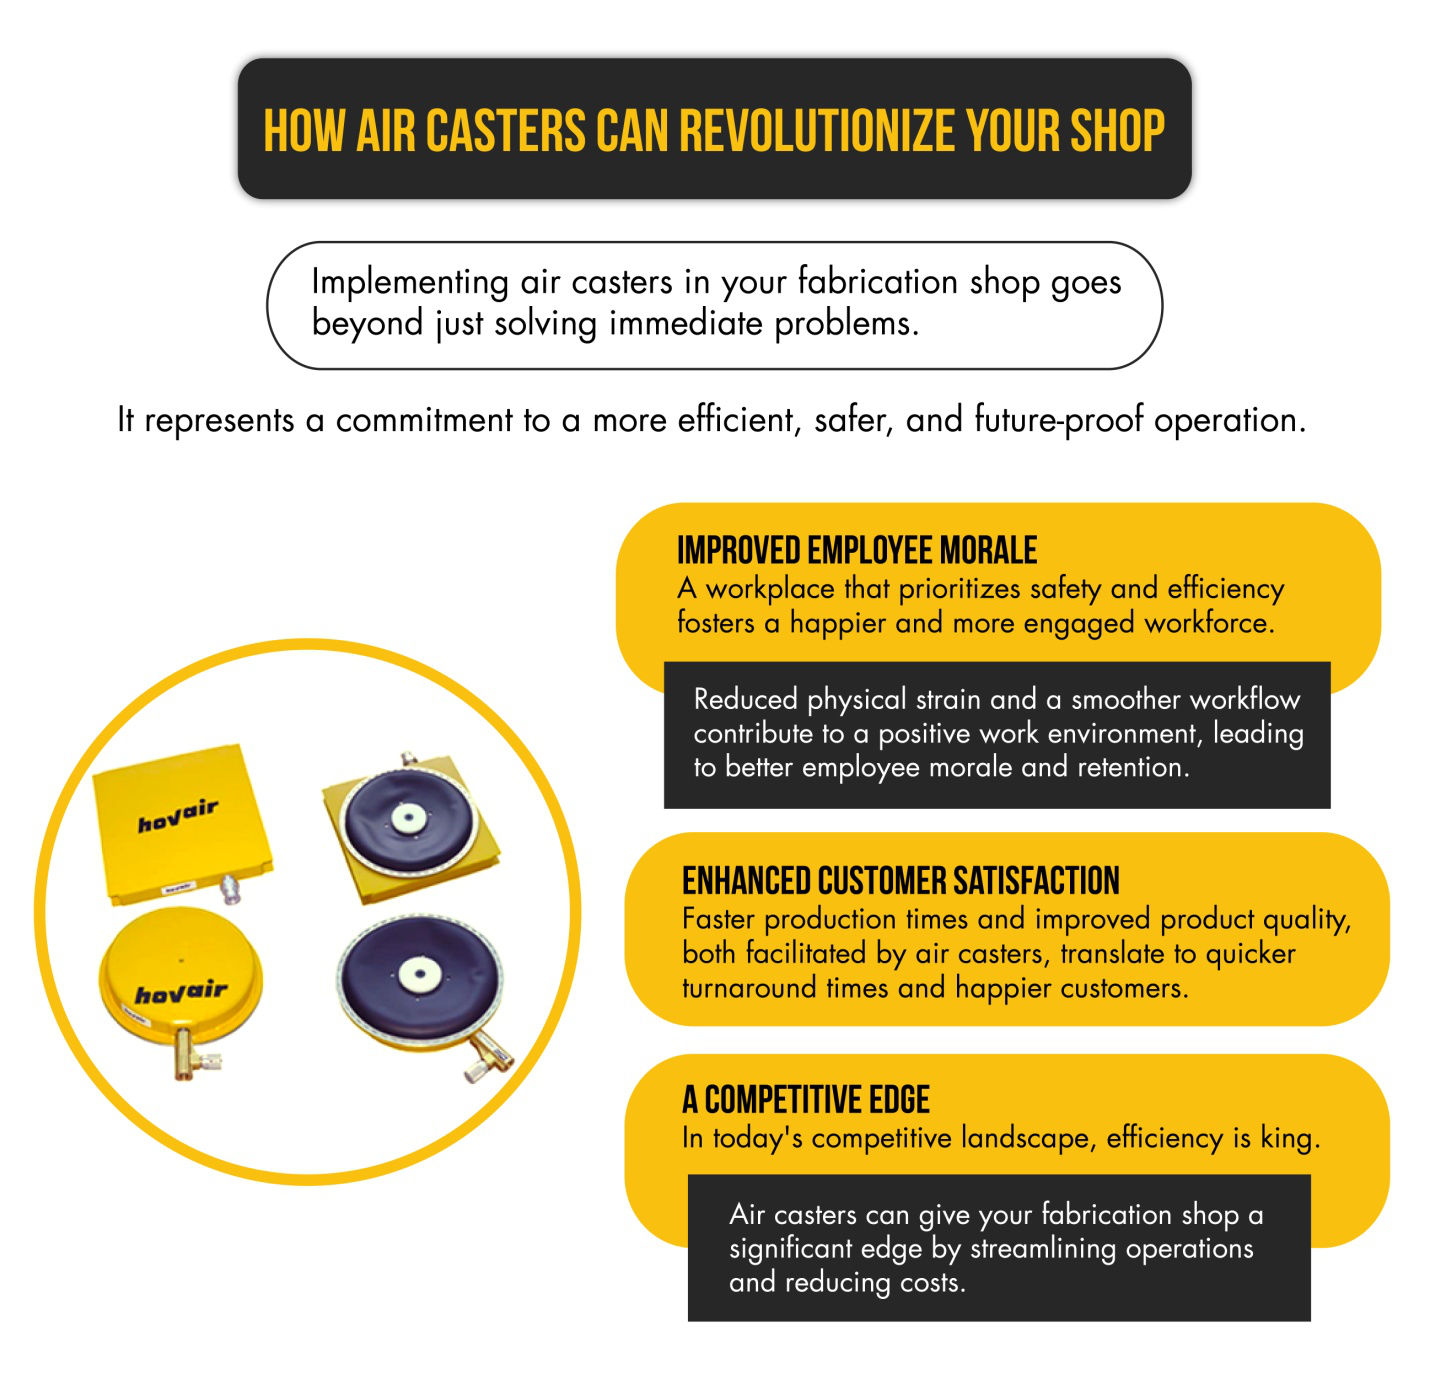 An infographic explaining how air casters can revolutionize a business